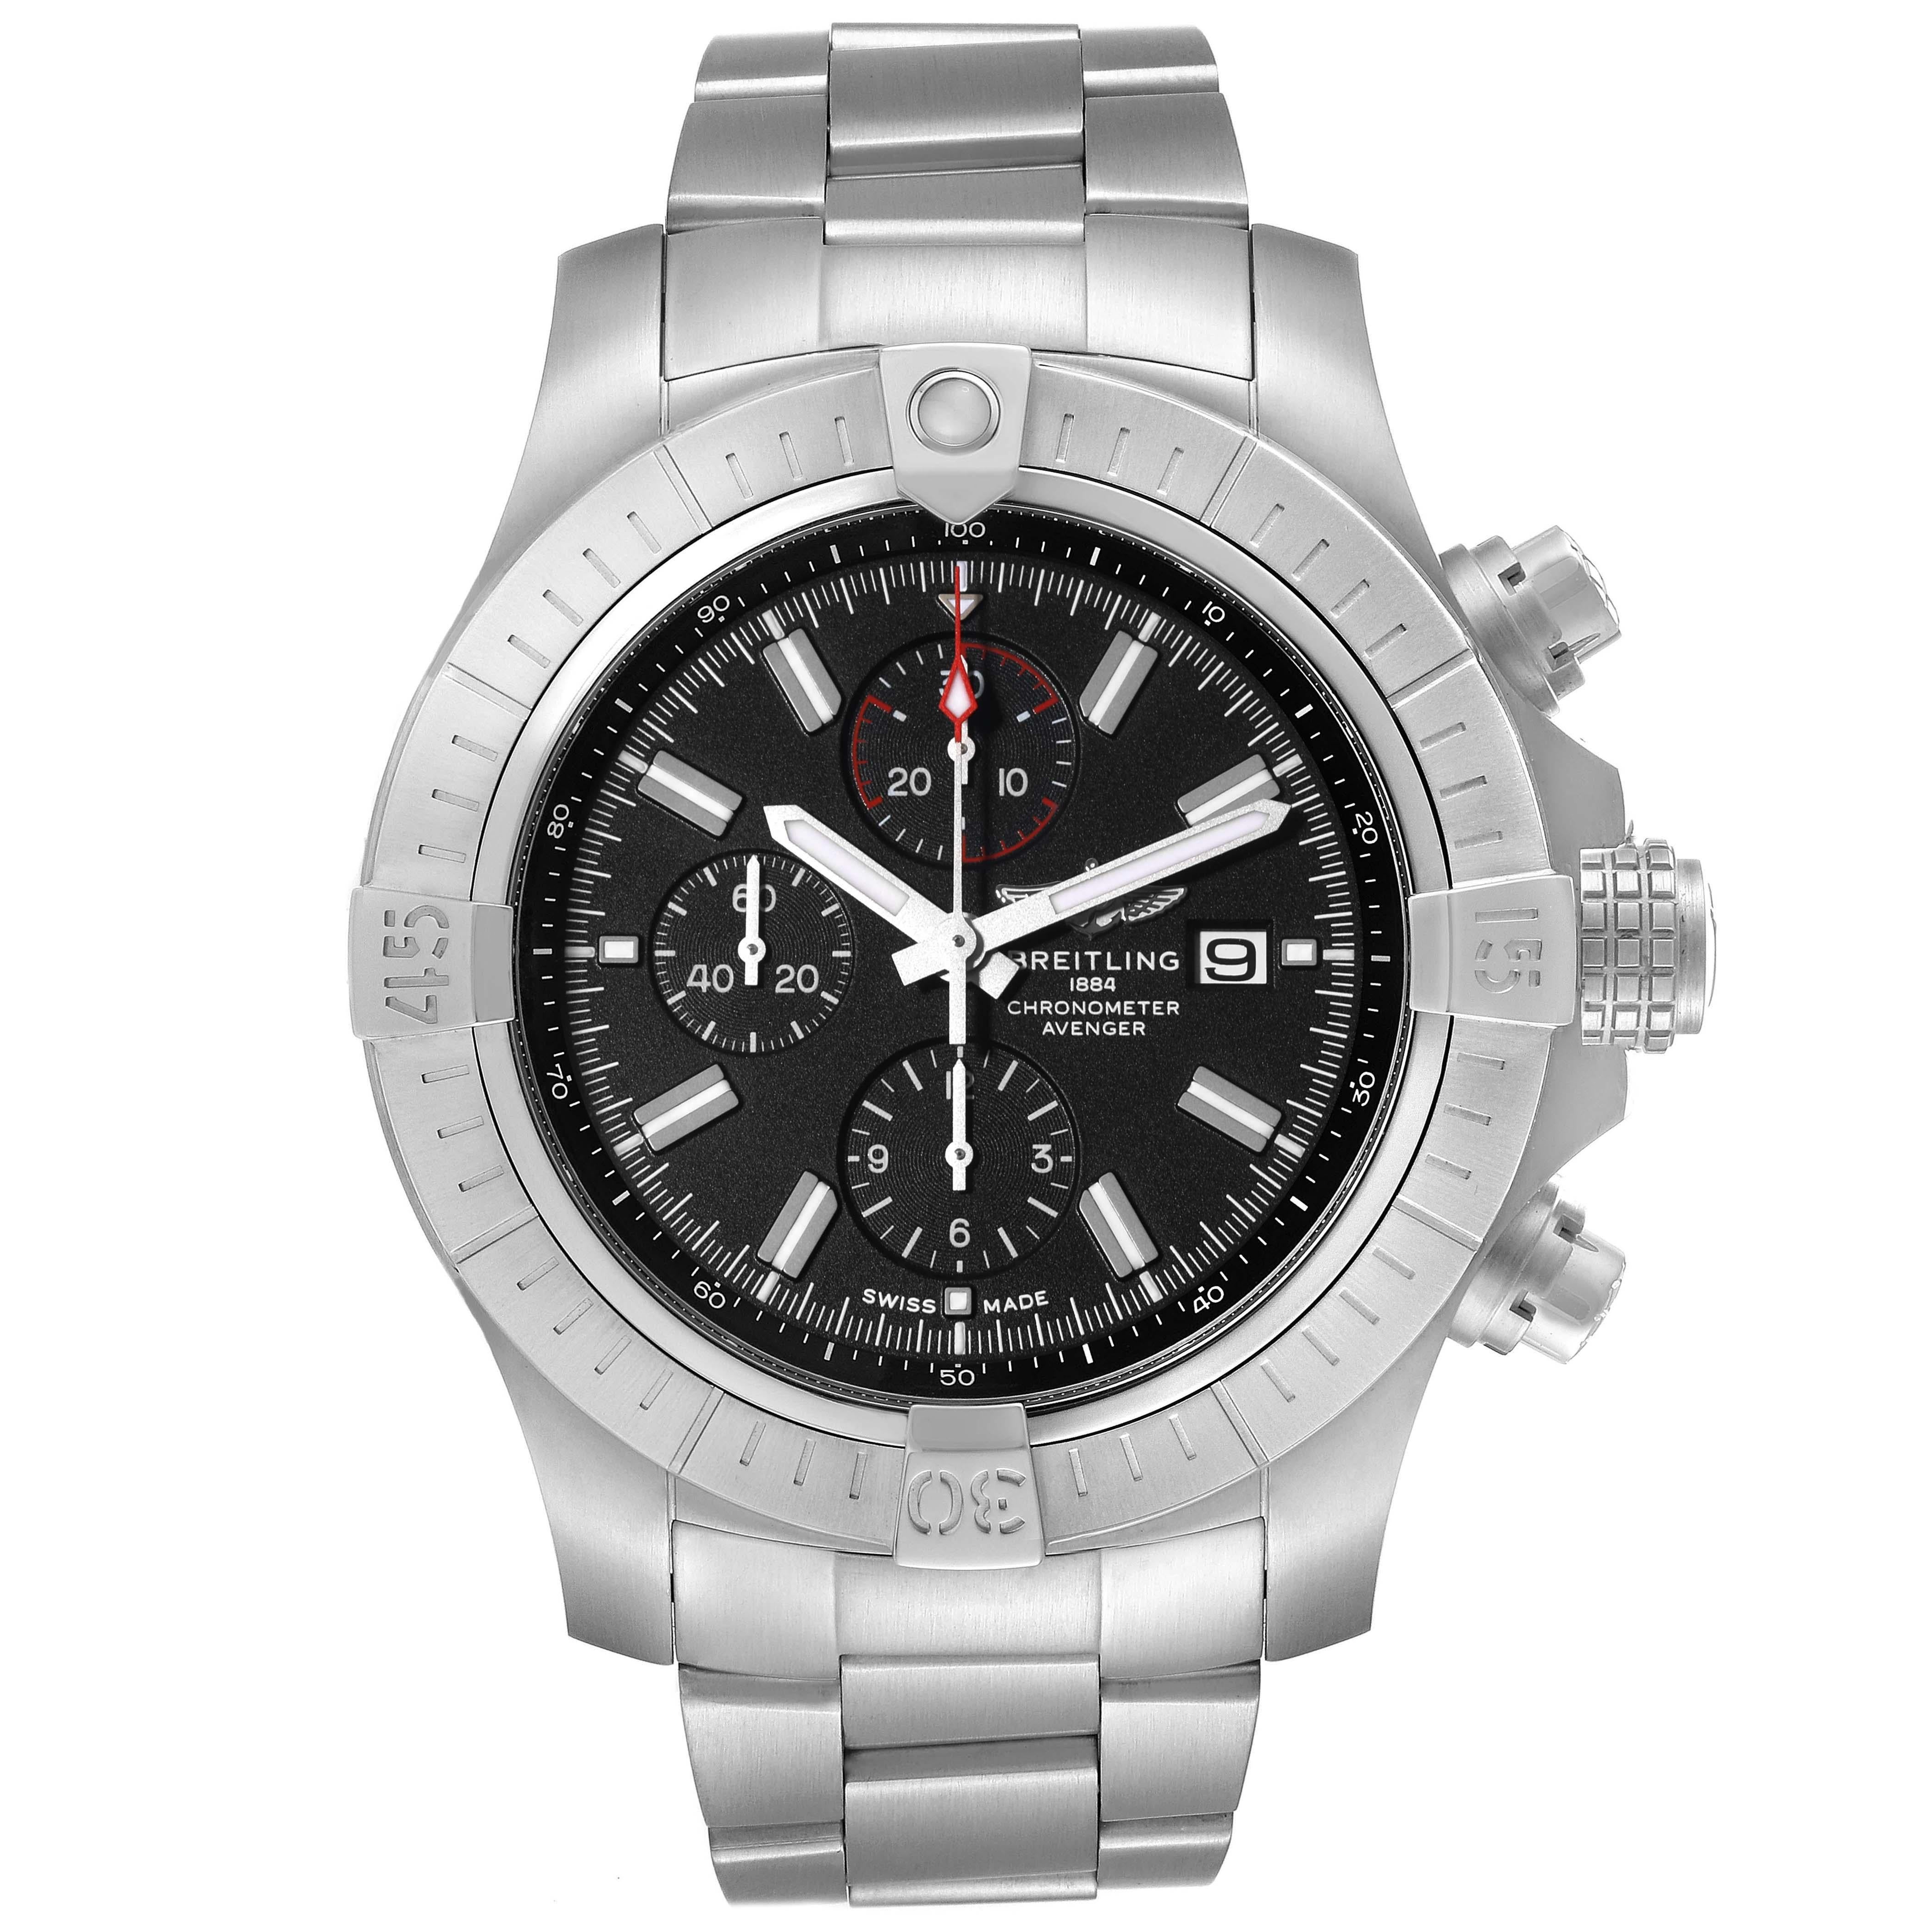 Breitling Aeromarine Super Avenger Steel Mens Watch A13375 Box Card. Automatic self-winding movement. Chronograph function. Stainless steel case 48 mm in diameter with screwed-locked crown and pushers. Case thickness 17.75 mm. Stainless steel